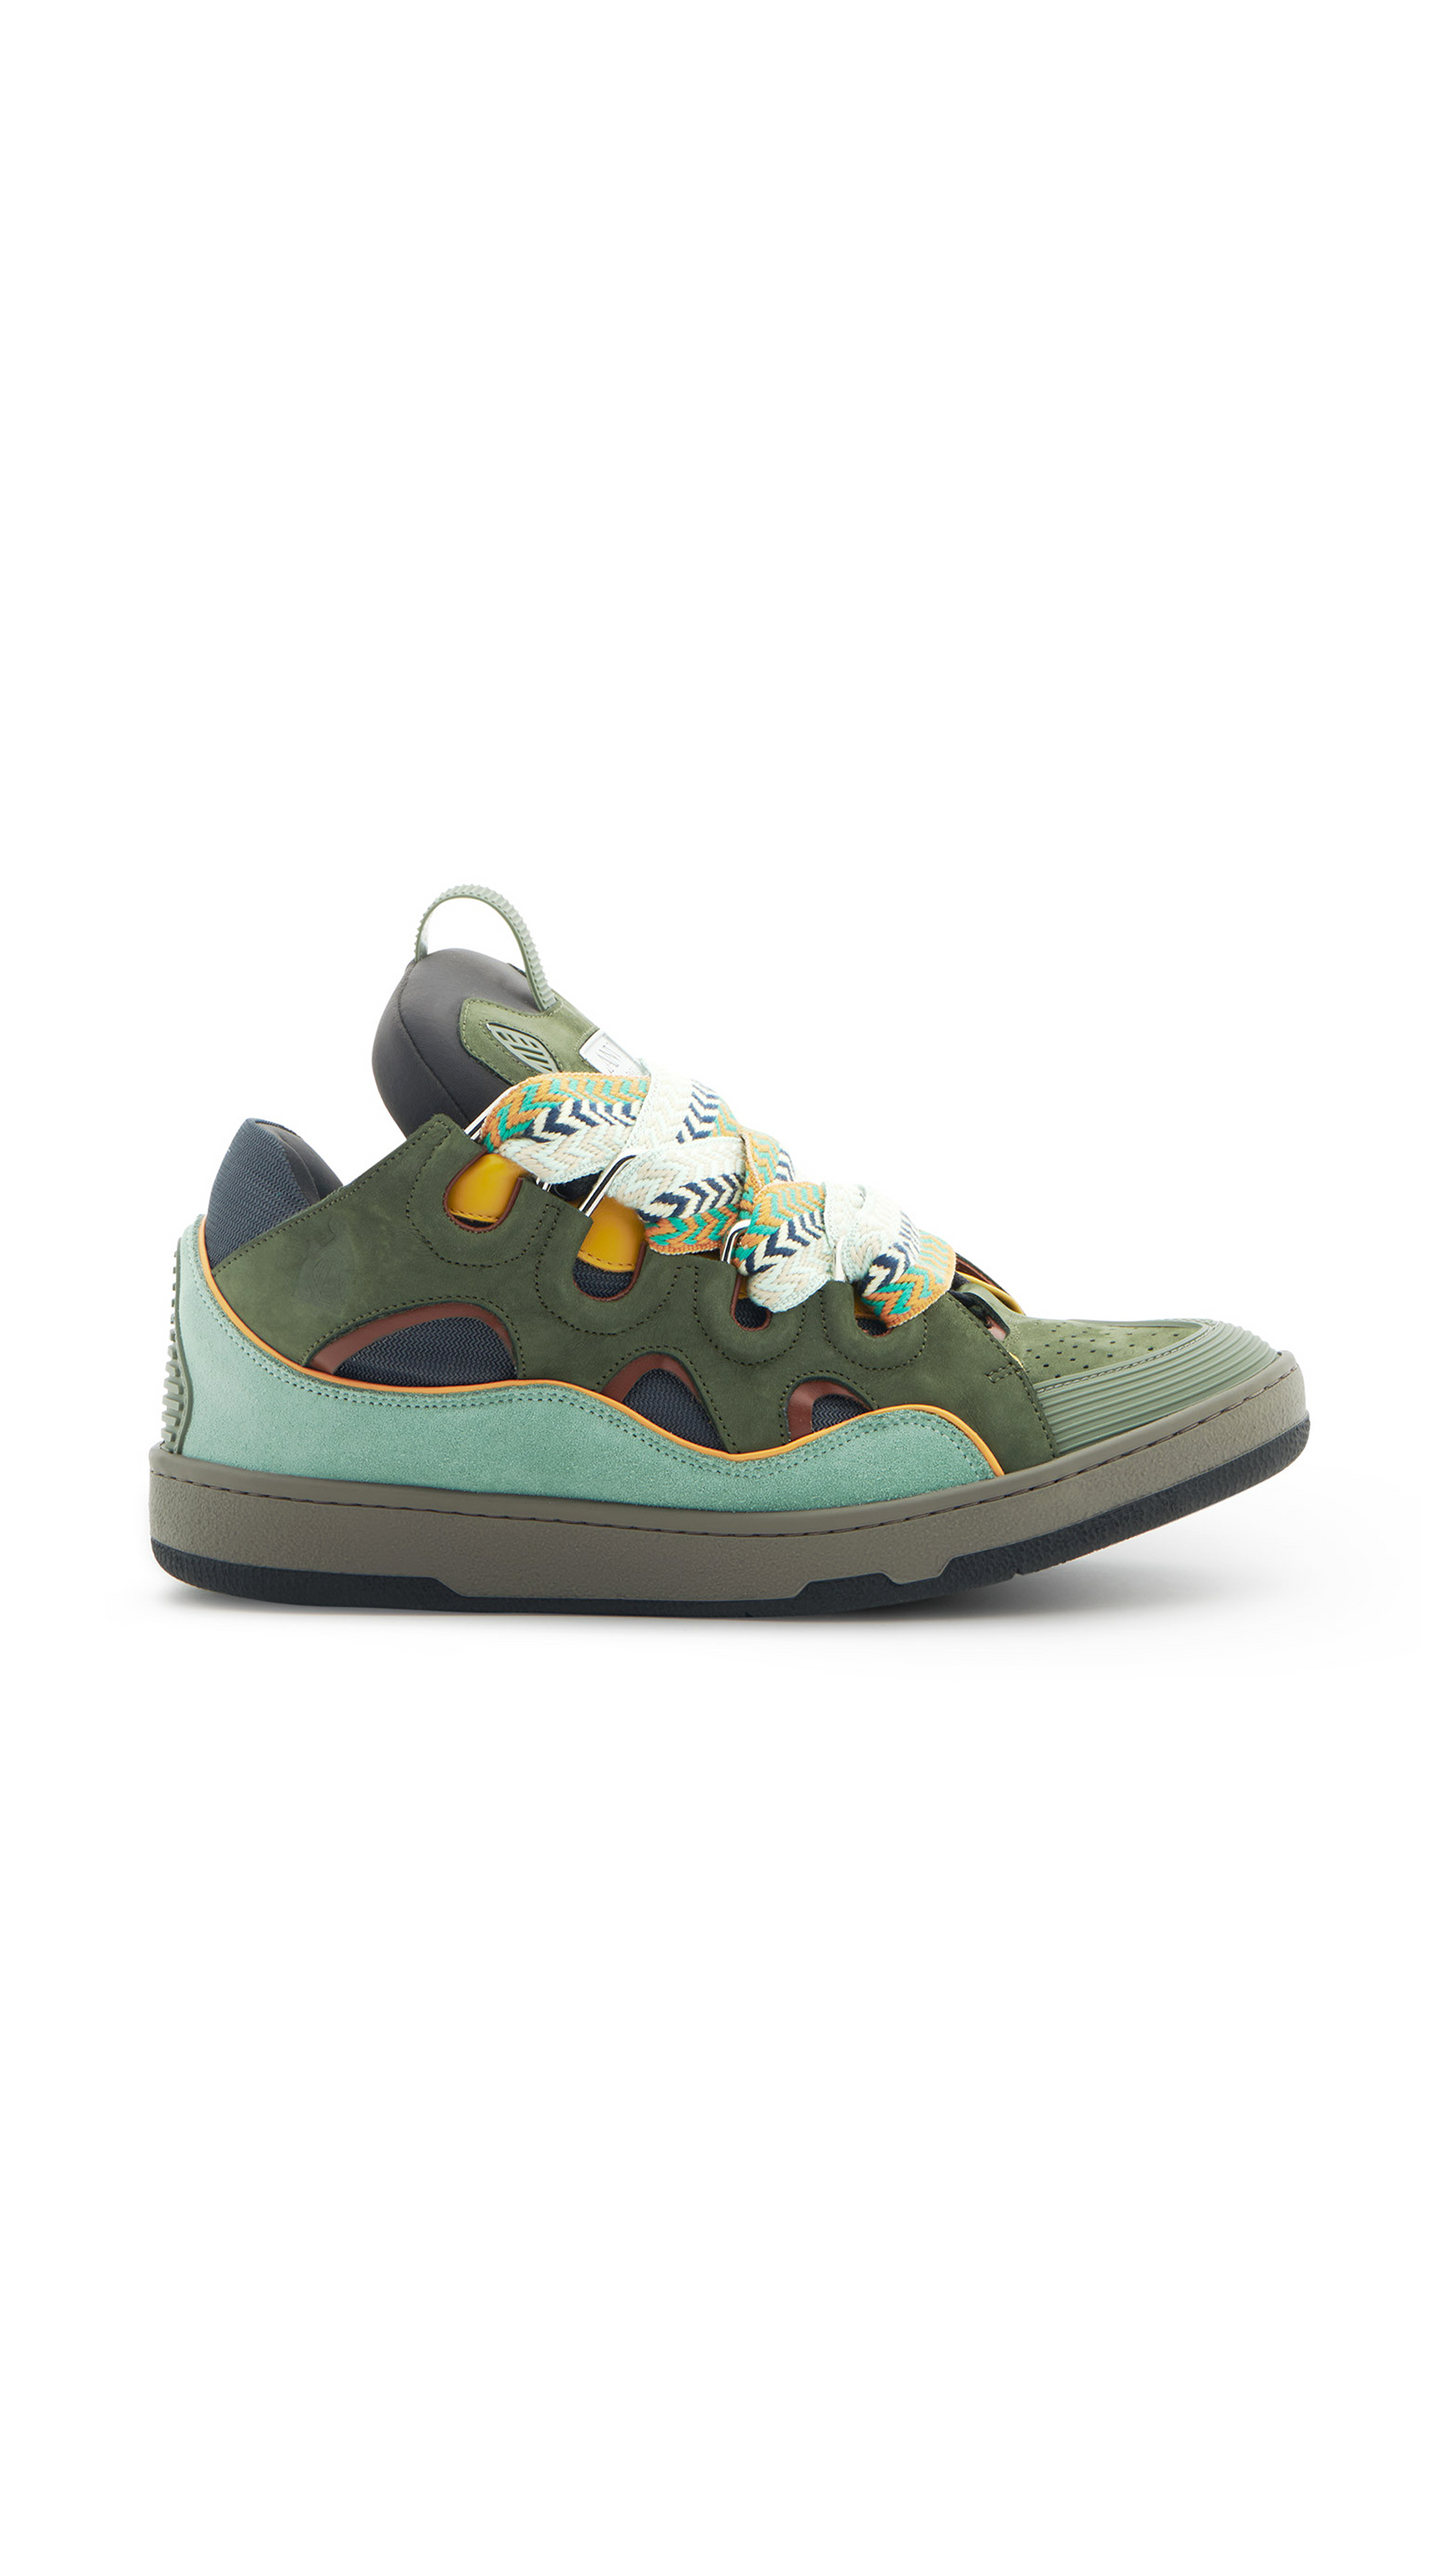 Leather Curb Sneakers - Green